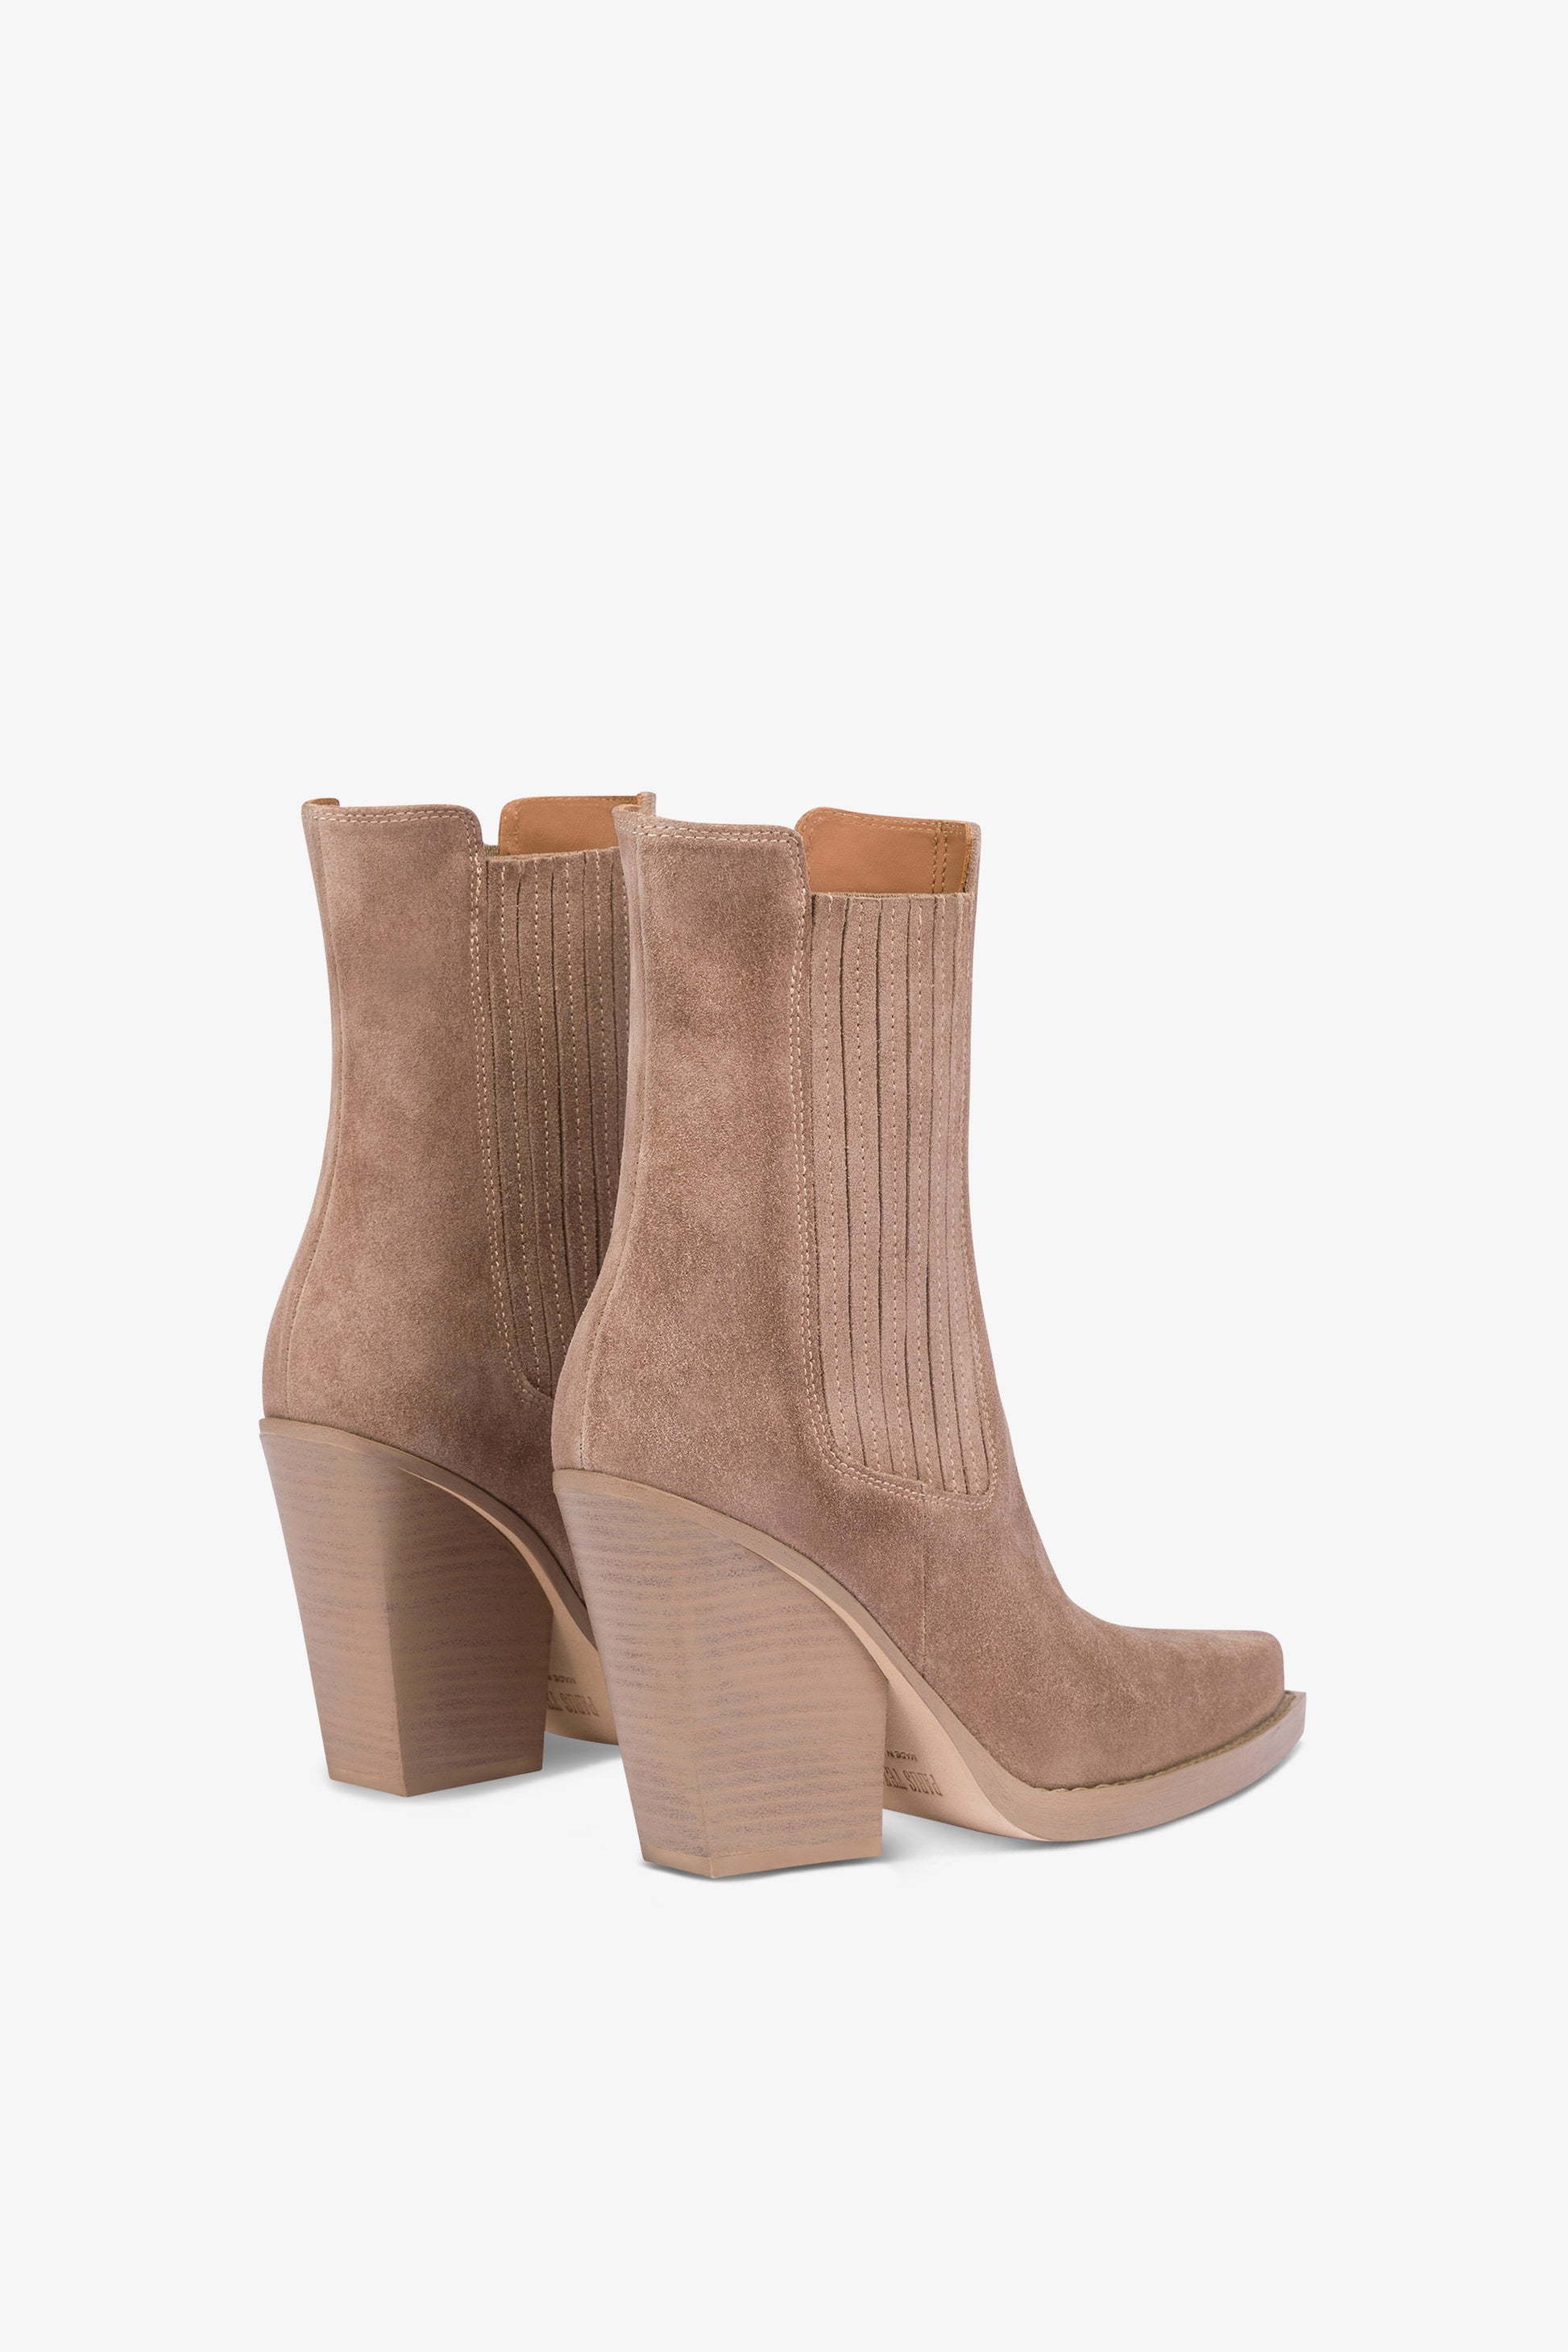 Square-toe ankle boots in koala suede leather